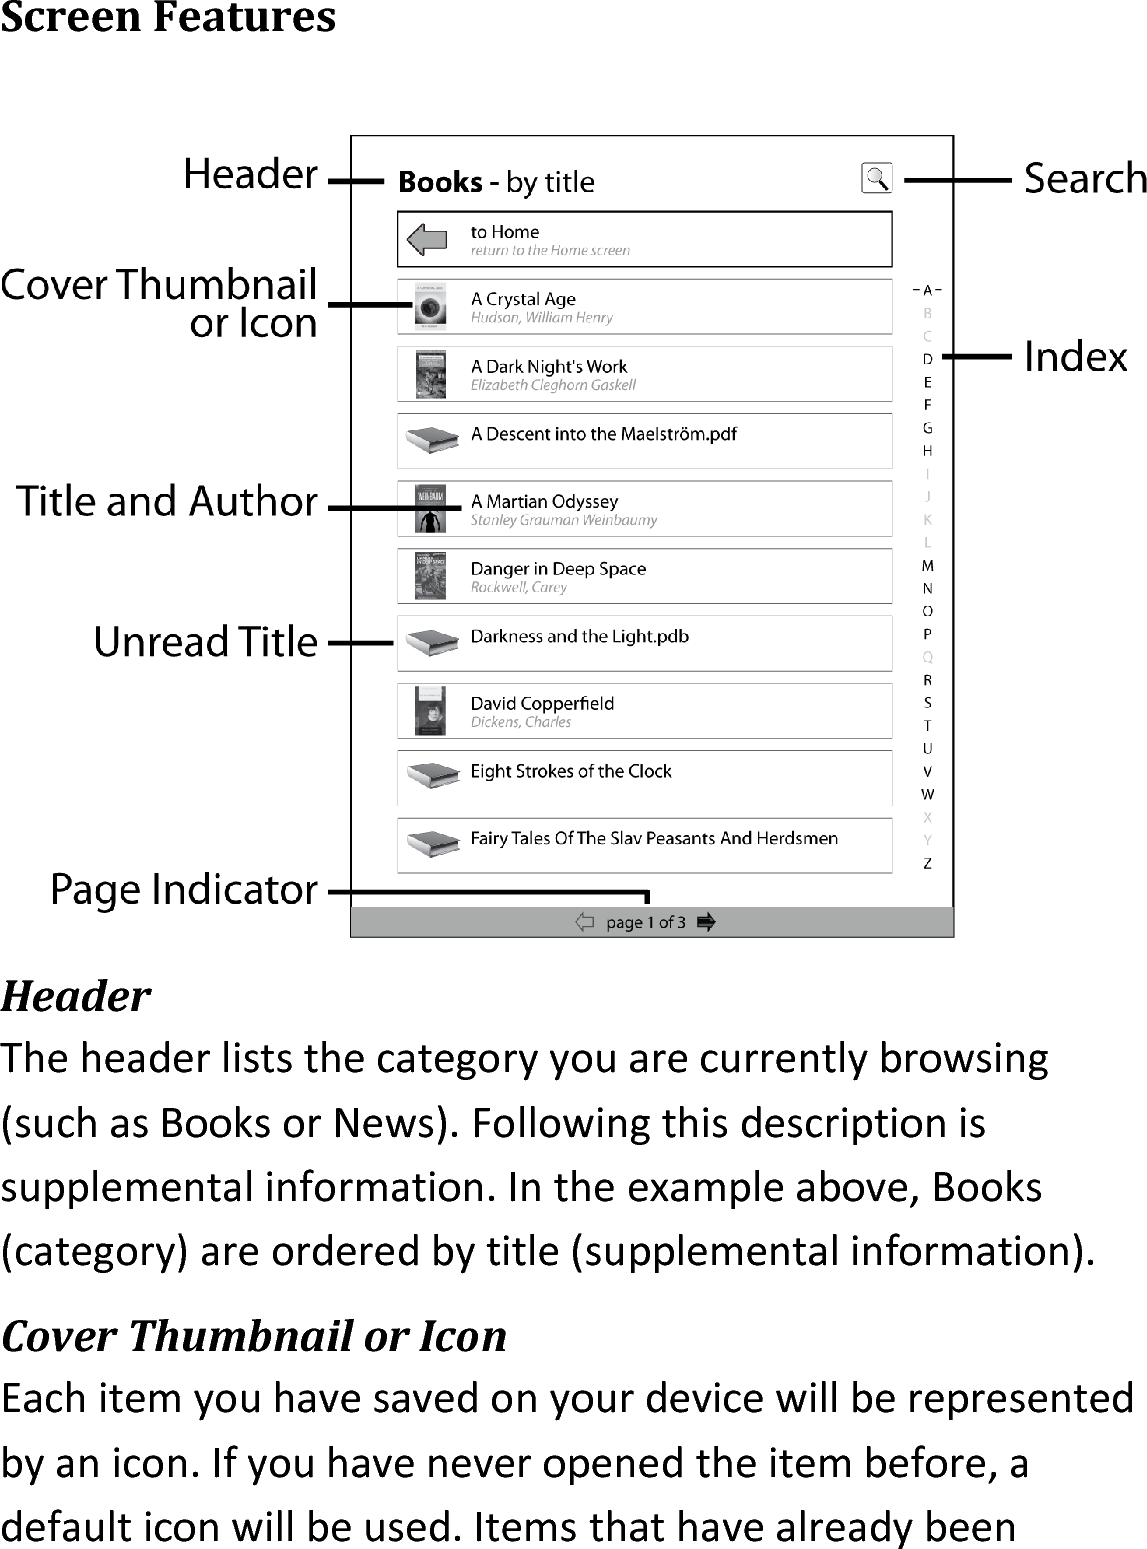 Screen FeaturesHeaderThe header lists the category you are currently browsing (such as Books or News). Following this description is supplemental information. In the example above, Books (category) are ordered by title (supplemental information).Cover Thumbnail or IconEach item you have saved on your device will be represented by an icon. If you have never opened the item before, a default icon will be used. Items that have already been 